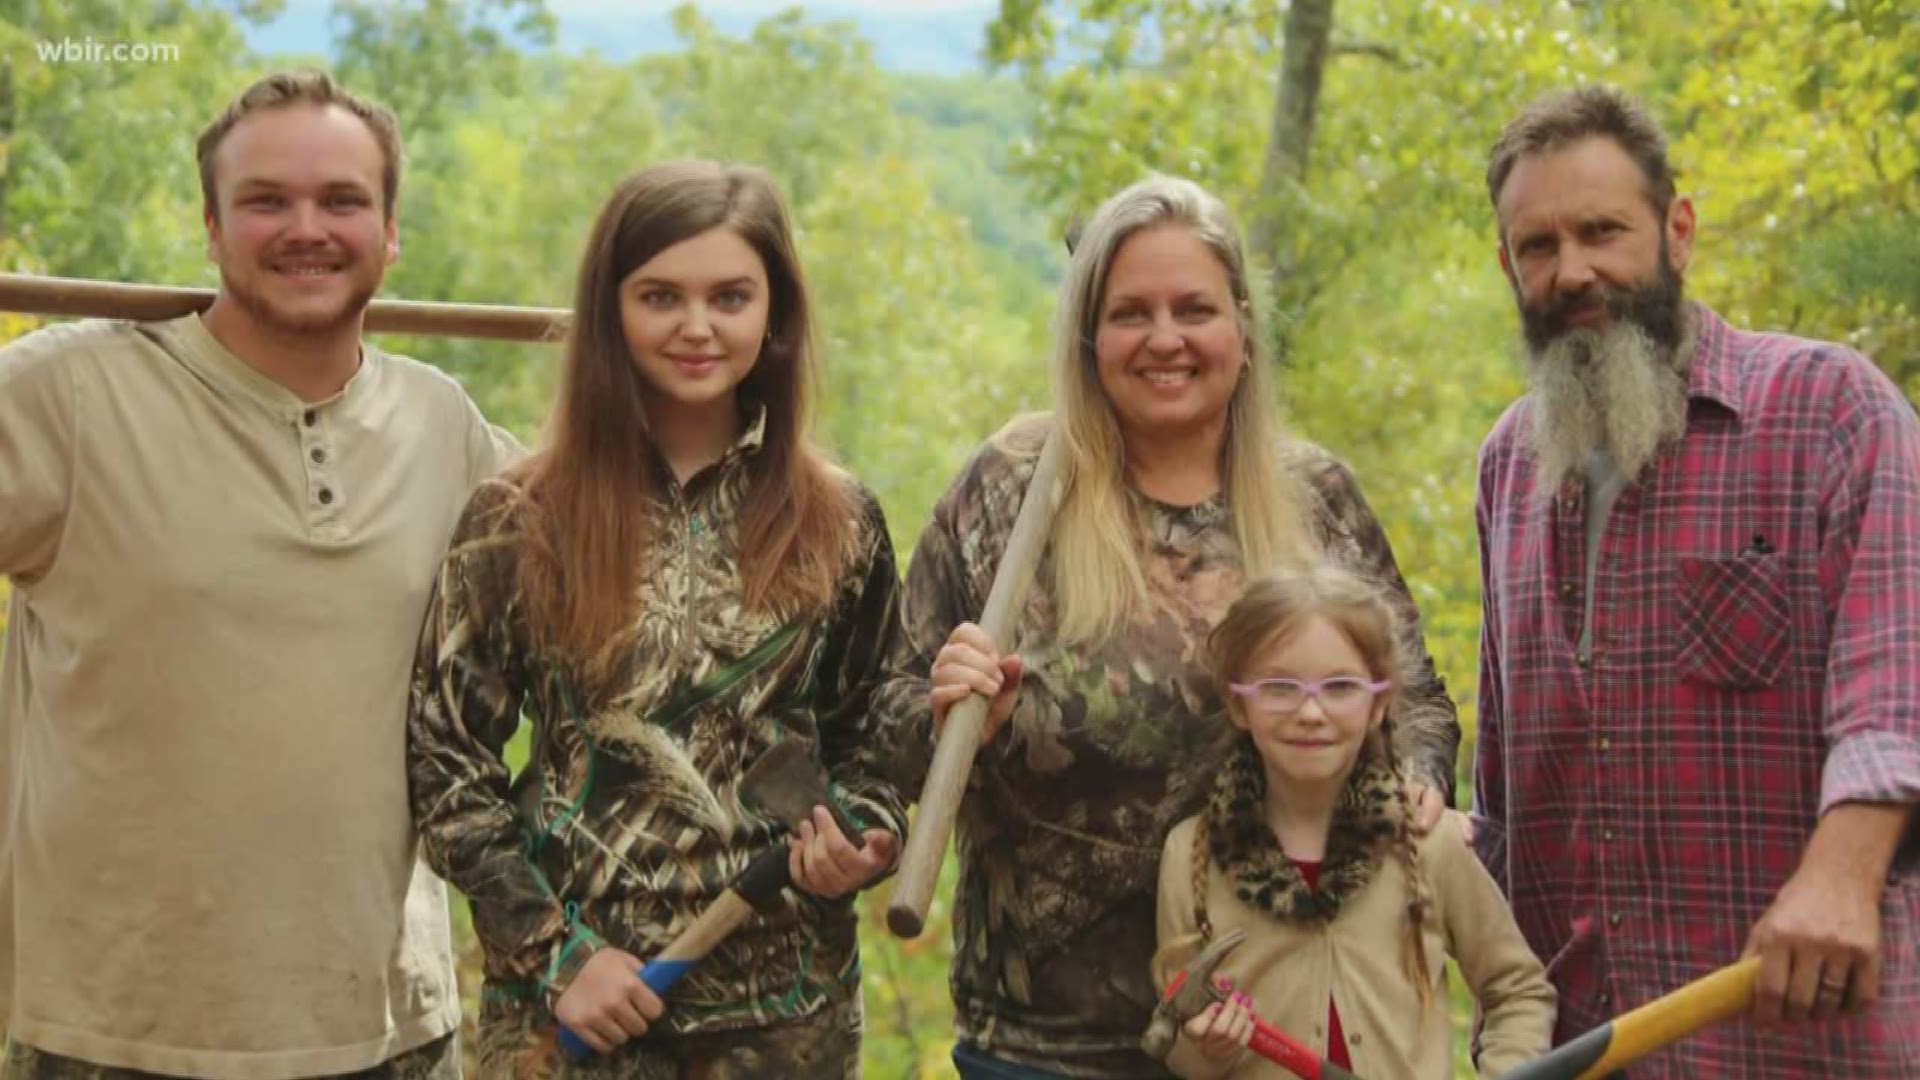 The Bradshaw family lives without most forms of modern technology on 40 acres in Cosby, Tennessee. They were featured on the Discovery show "Living off the Grid."